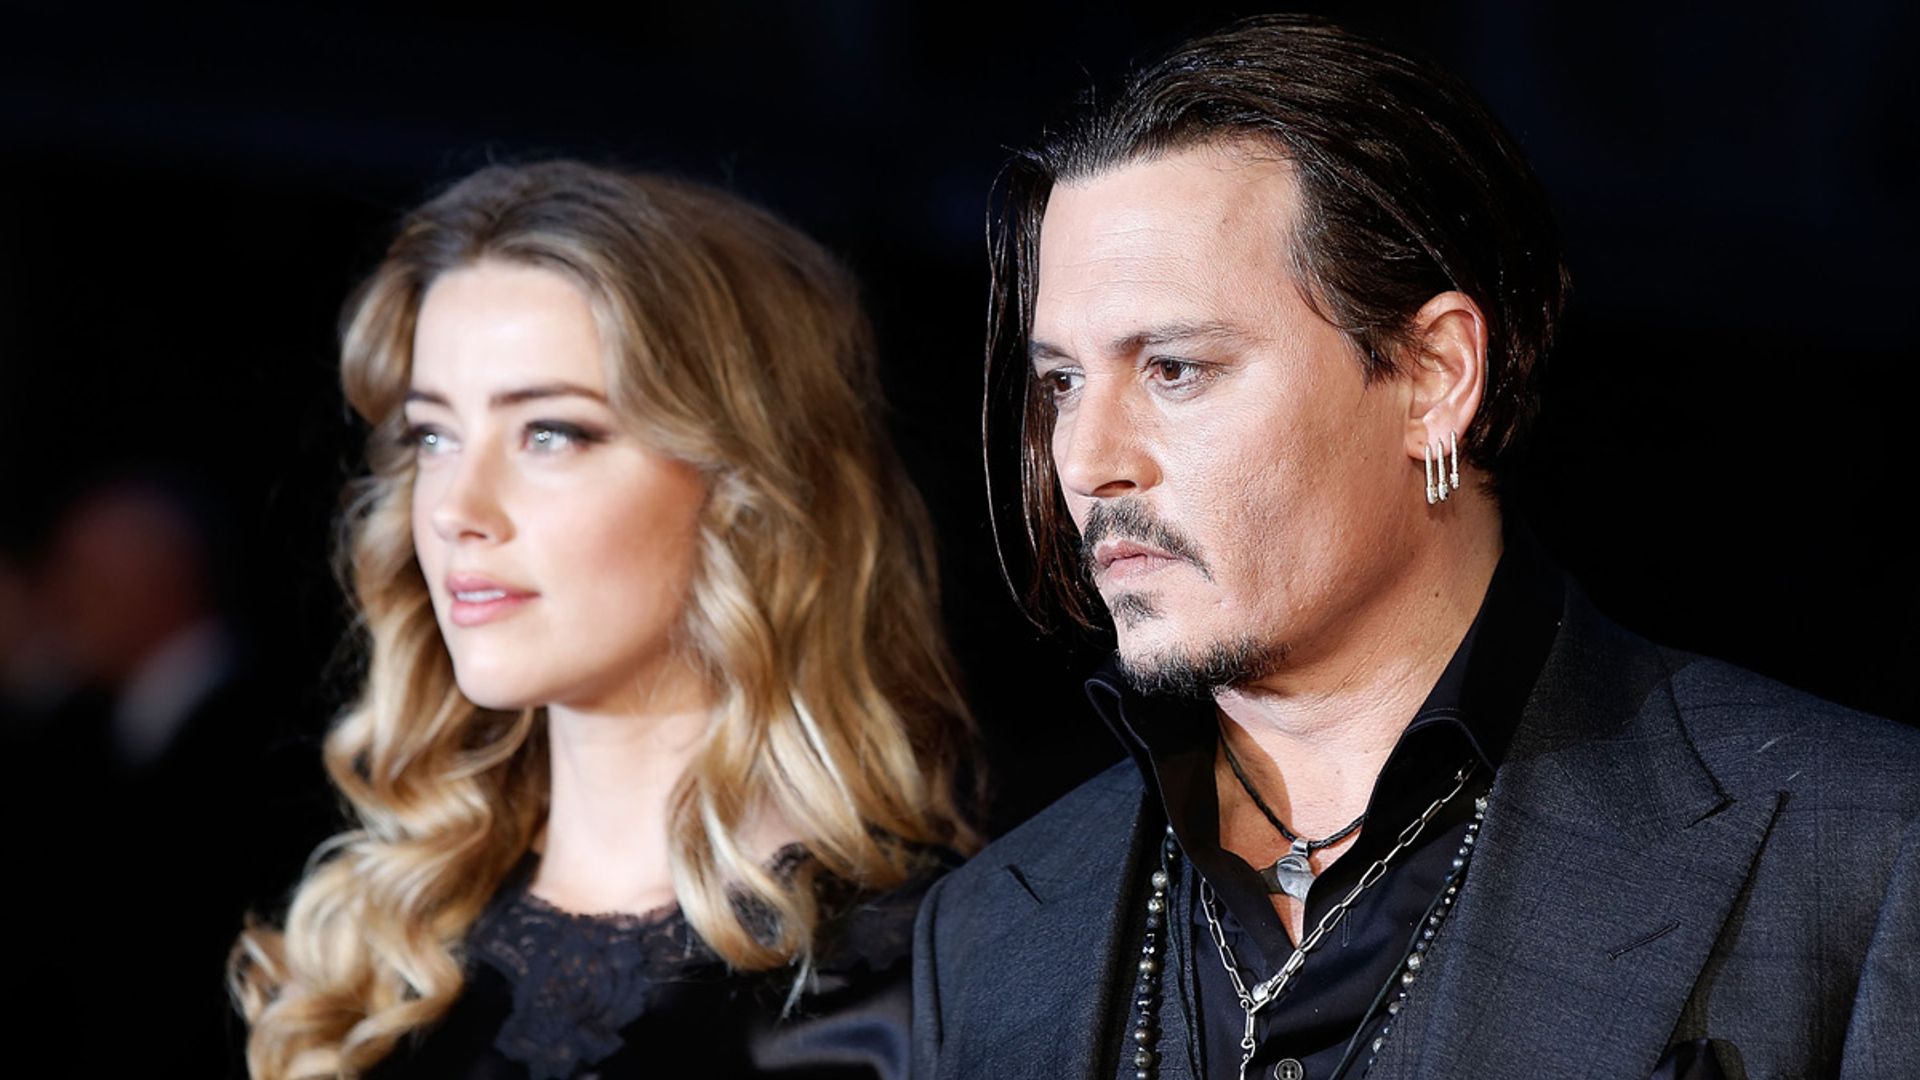 Johnny Depp issues warning to fans following Amber Heard trial